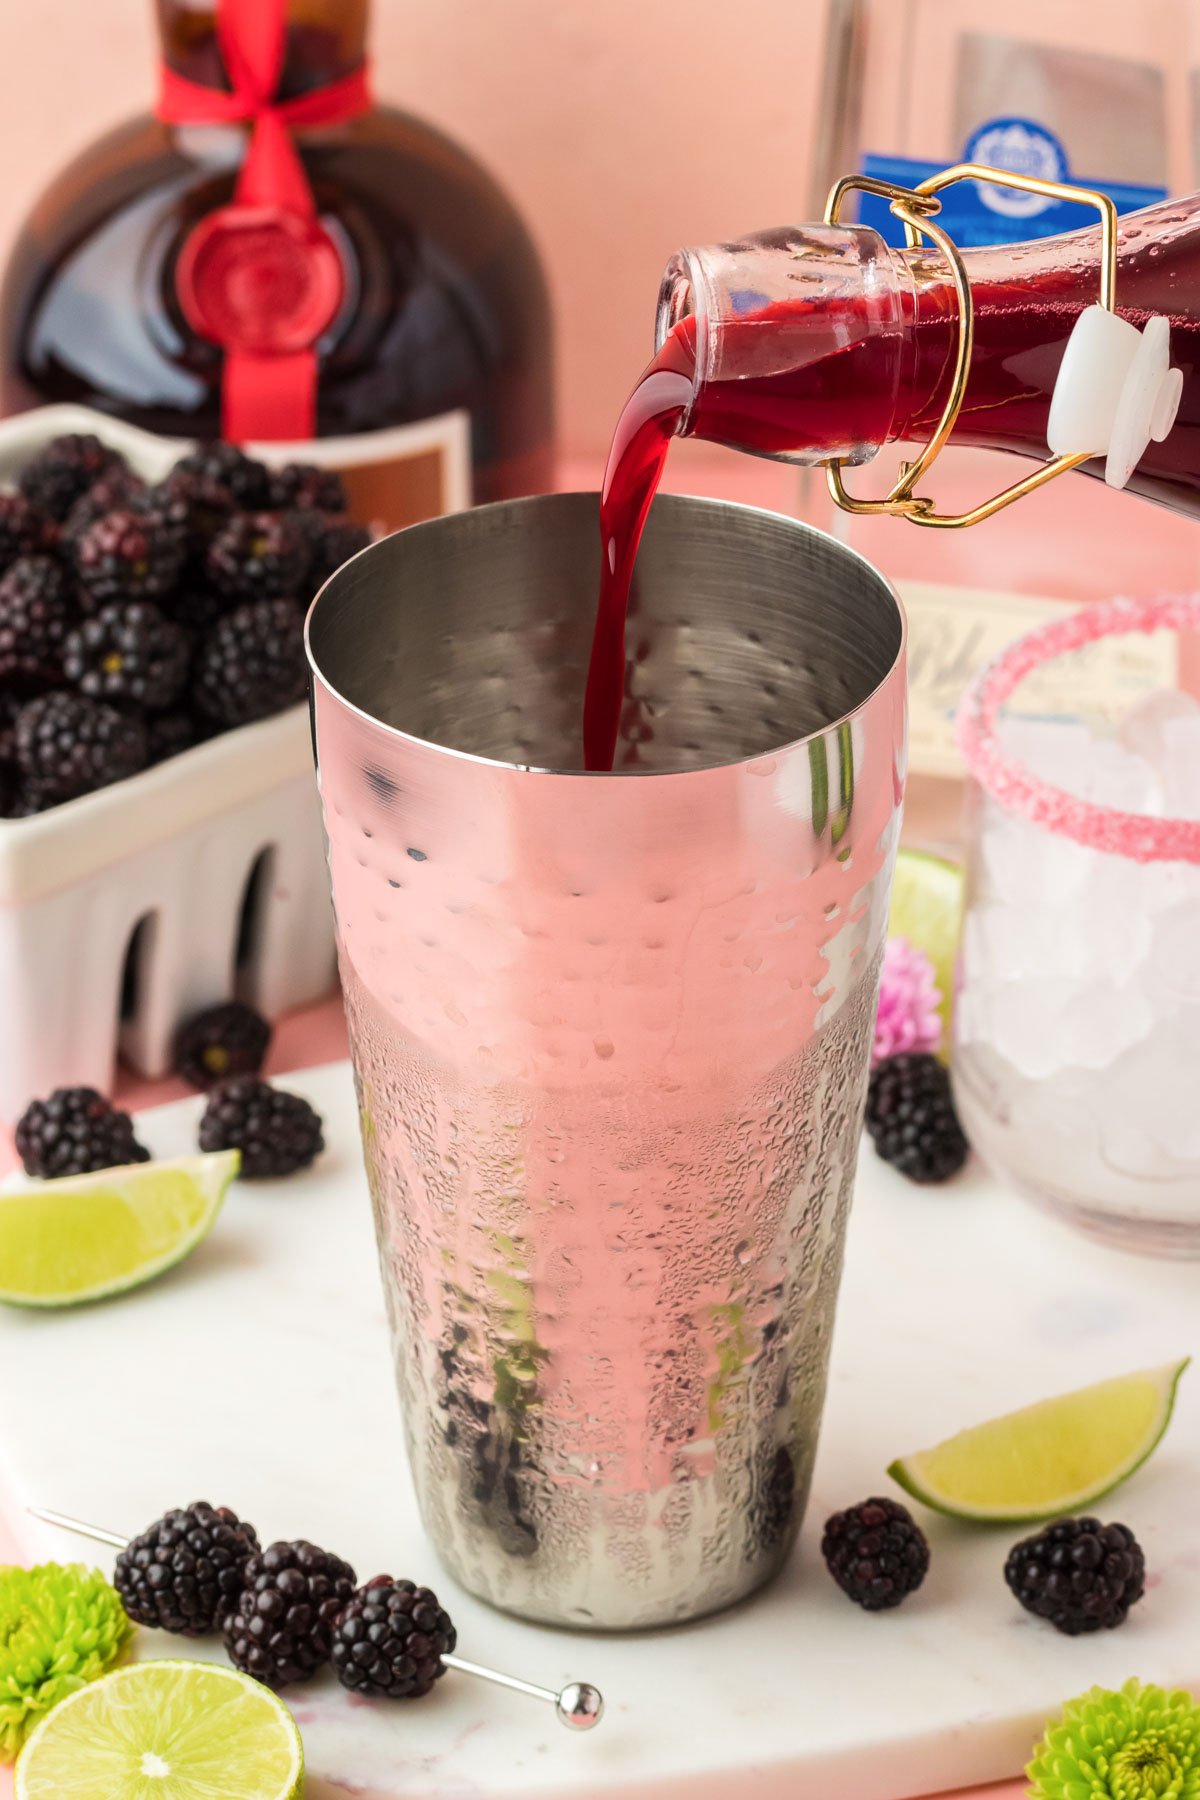 Blackberry simple syrup being poured into a cocktail shaker.